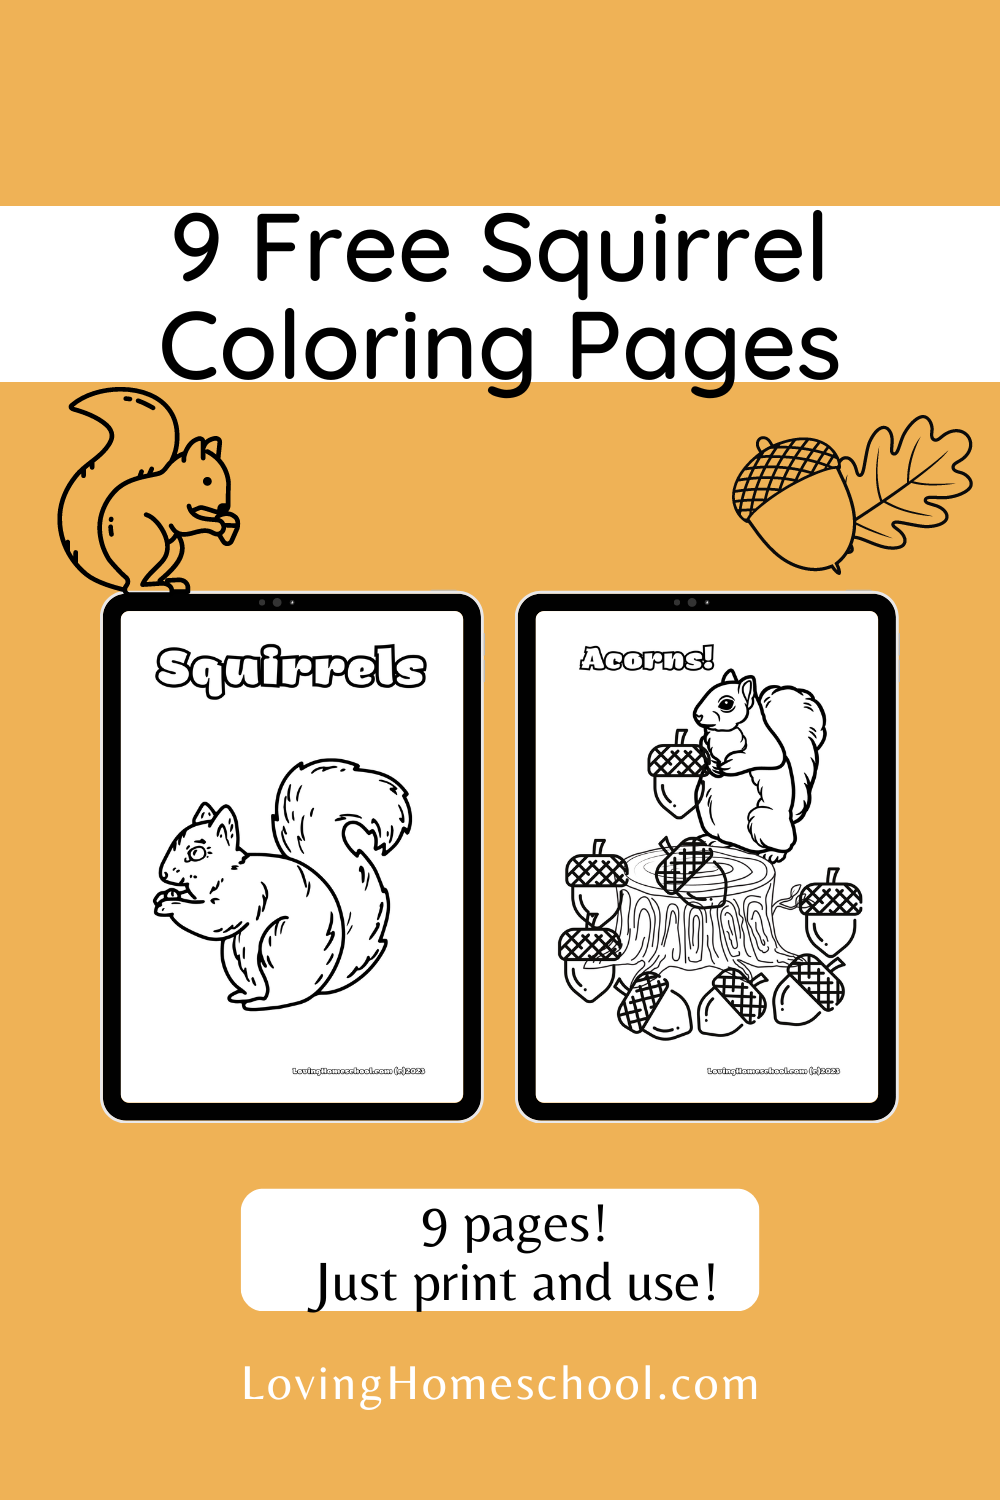 9 Free Squirrel Coloring Pages Pinterest Pin